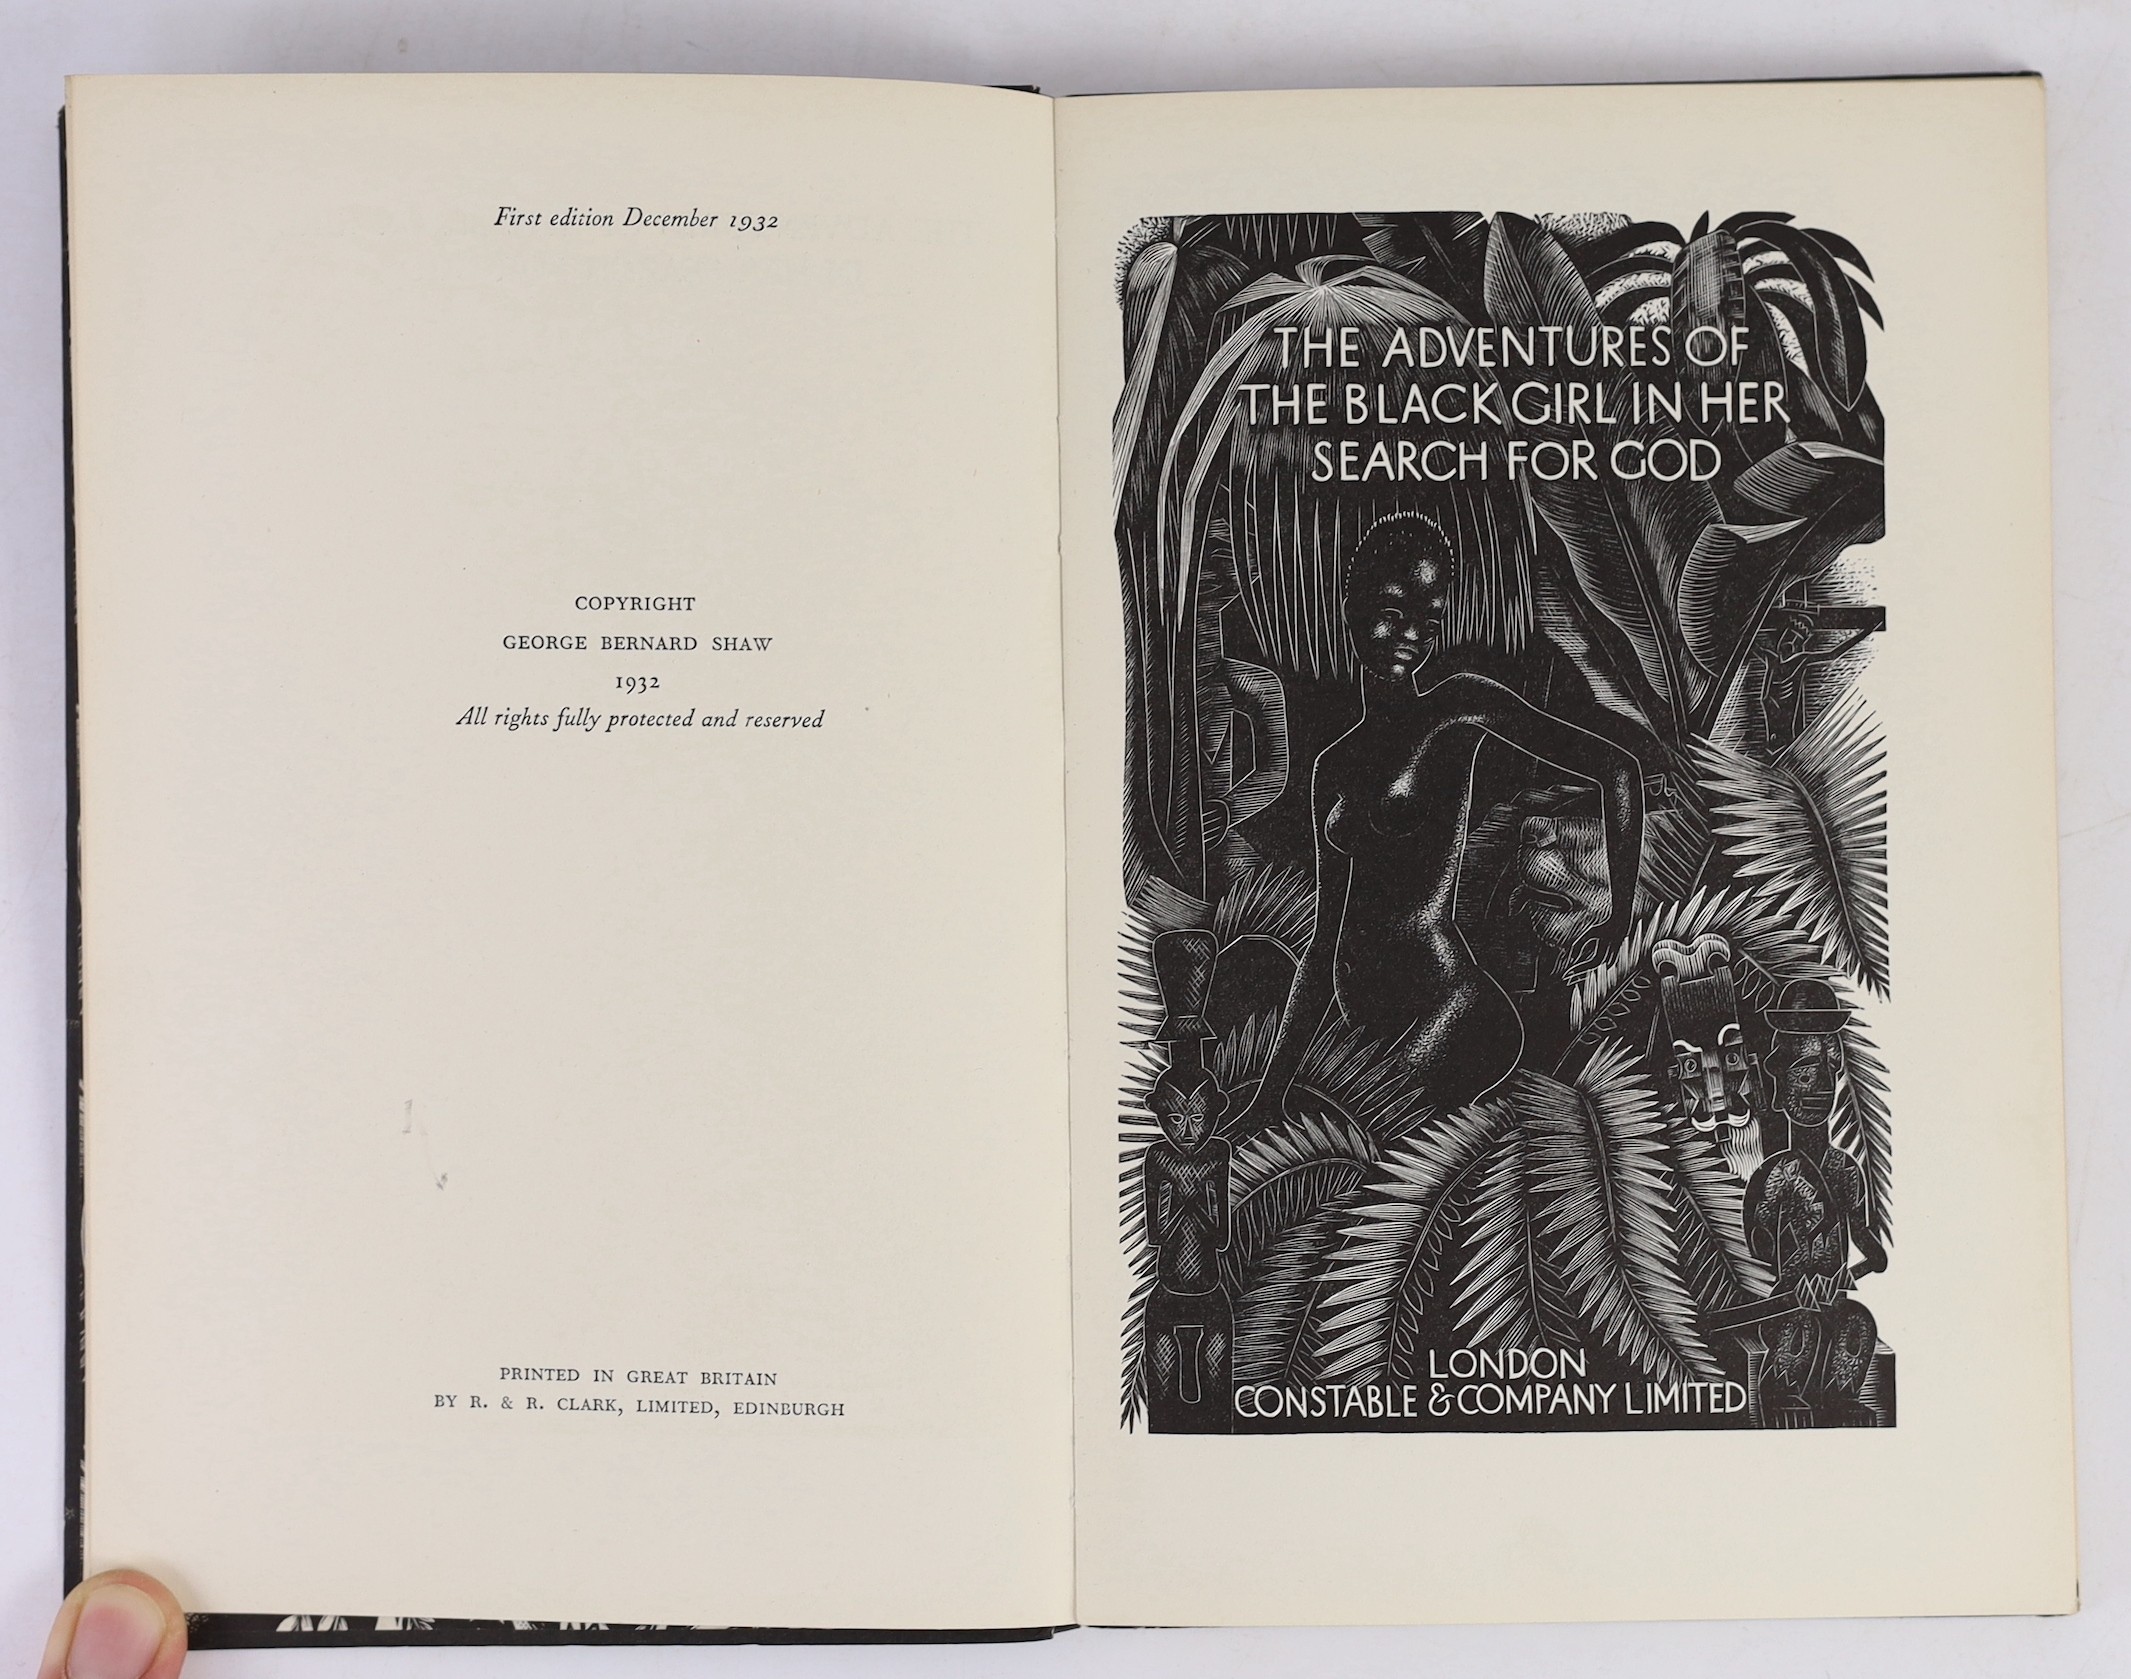 Shaw, Bernard - The Adventures of the Black Girl in her Search for God, 1st edition, illustrated with 20 wood engravings by John Farleigh, 8vo, original pictorial boards, Constable & Company Limited, London, 1932